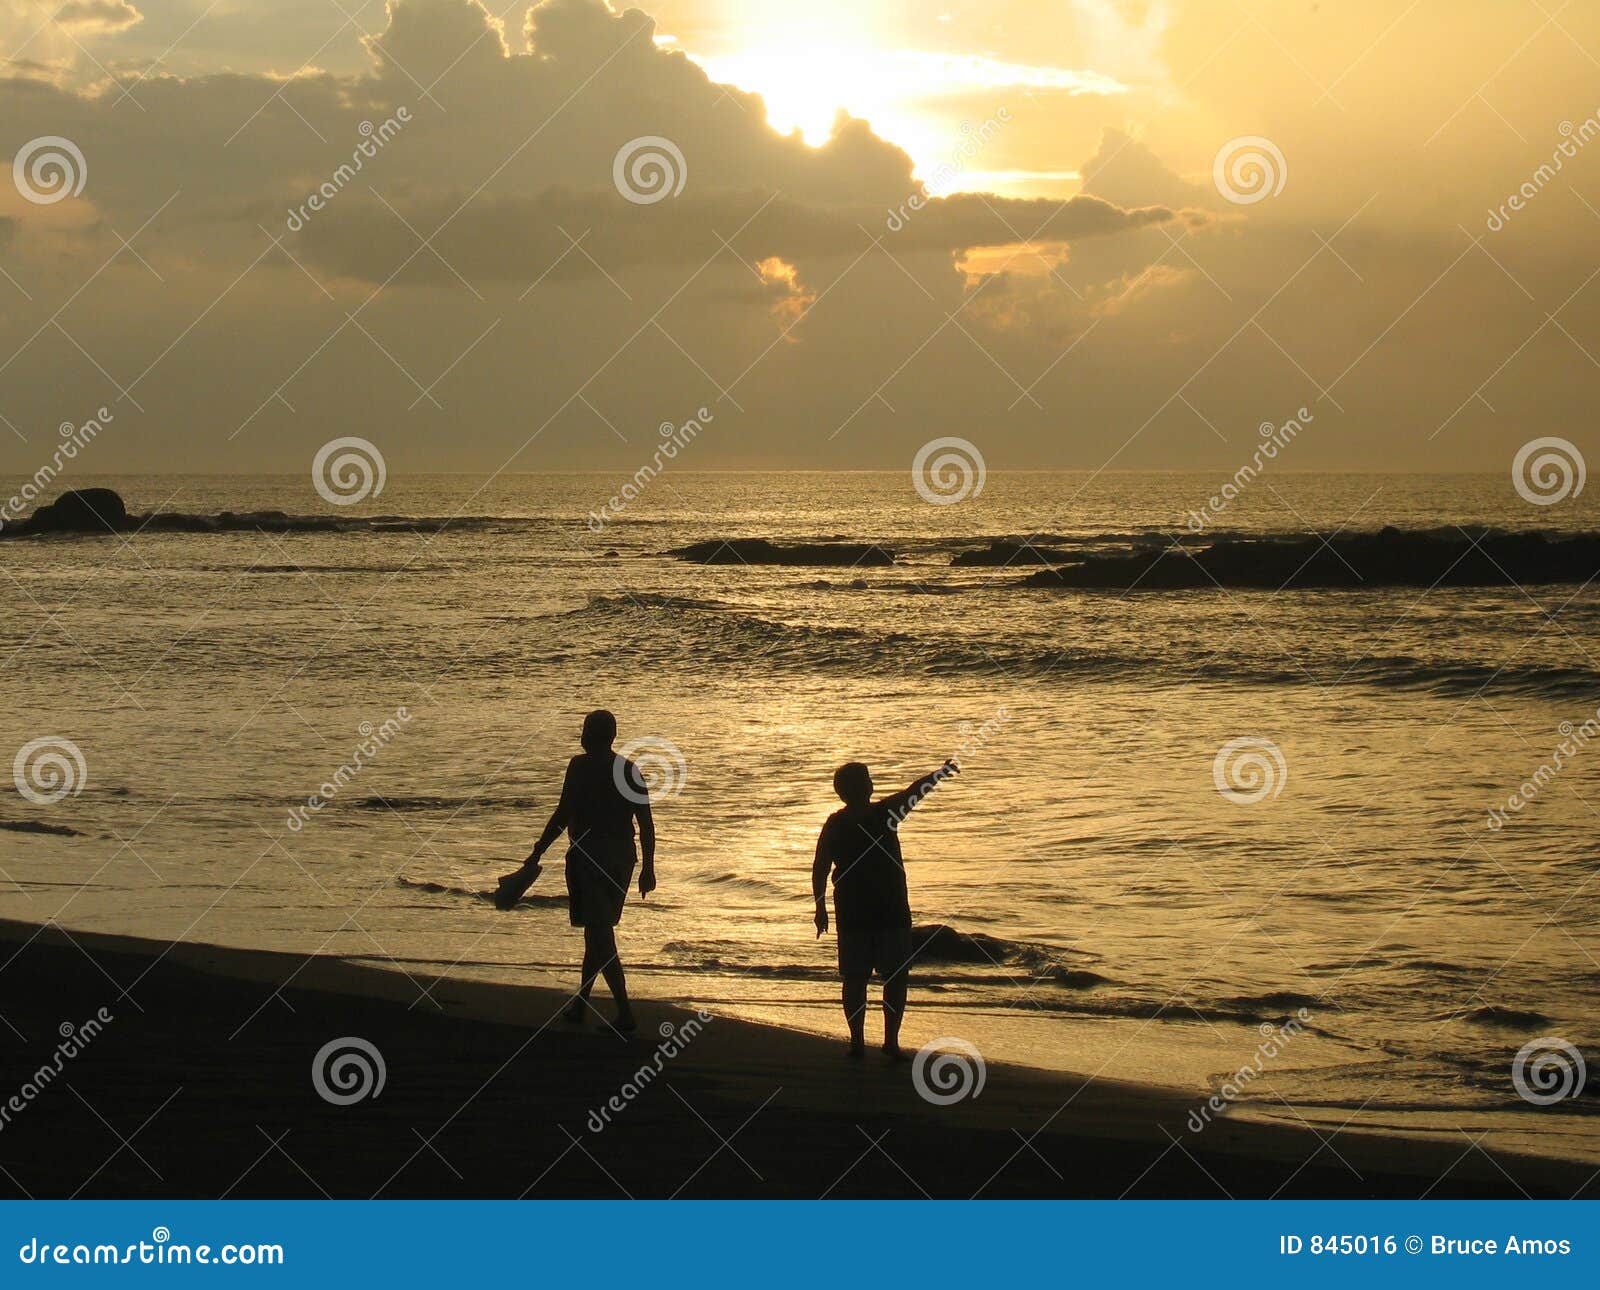 Pointing to the sky stock photo. Image of ocean, gold, khaolak - 845016